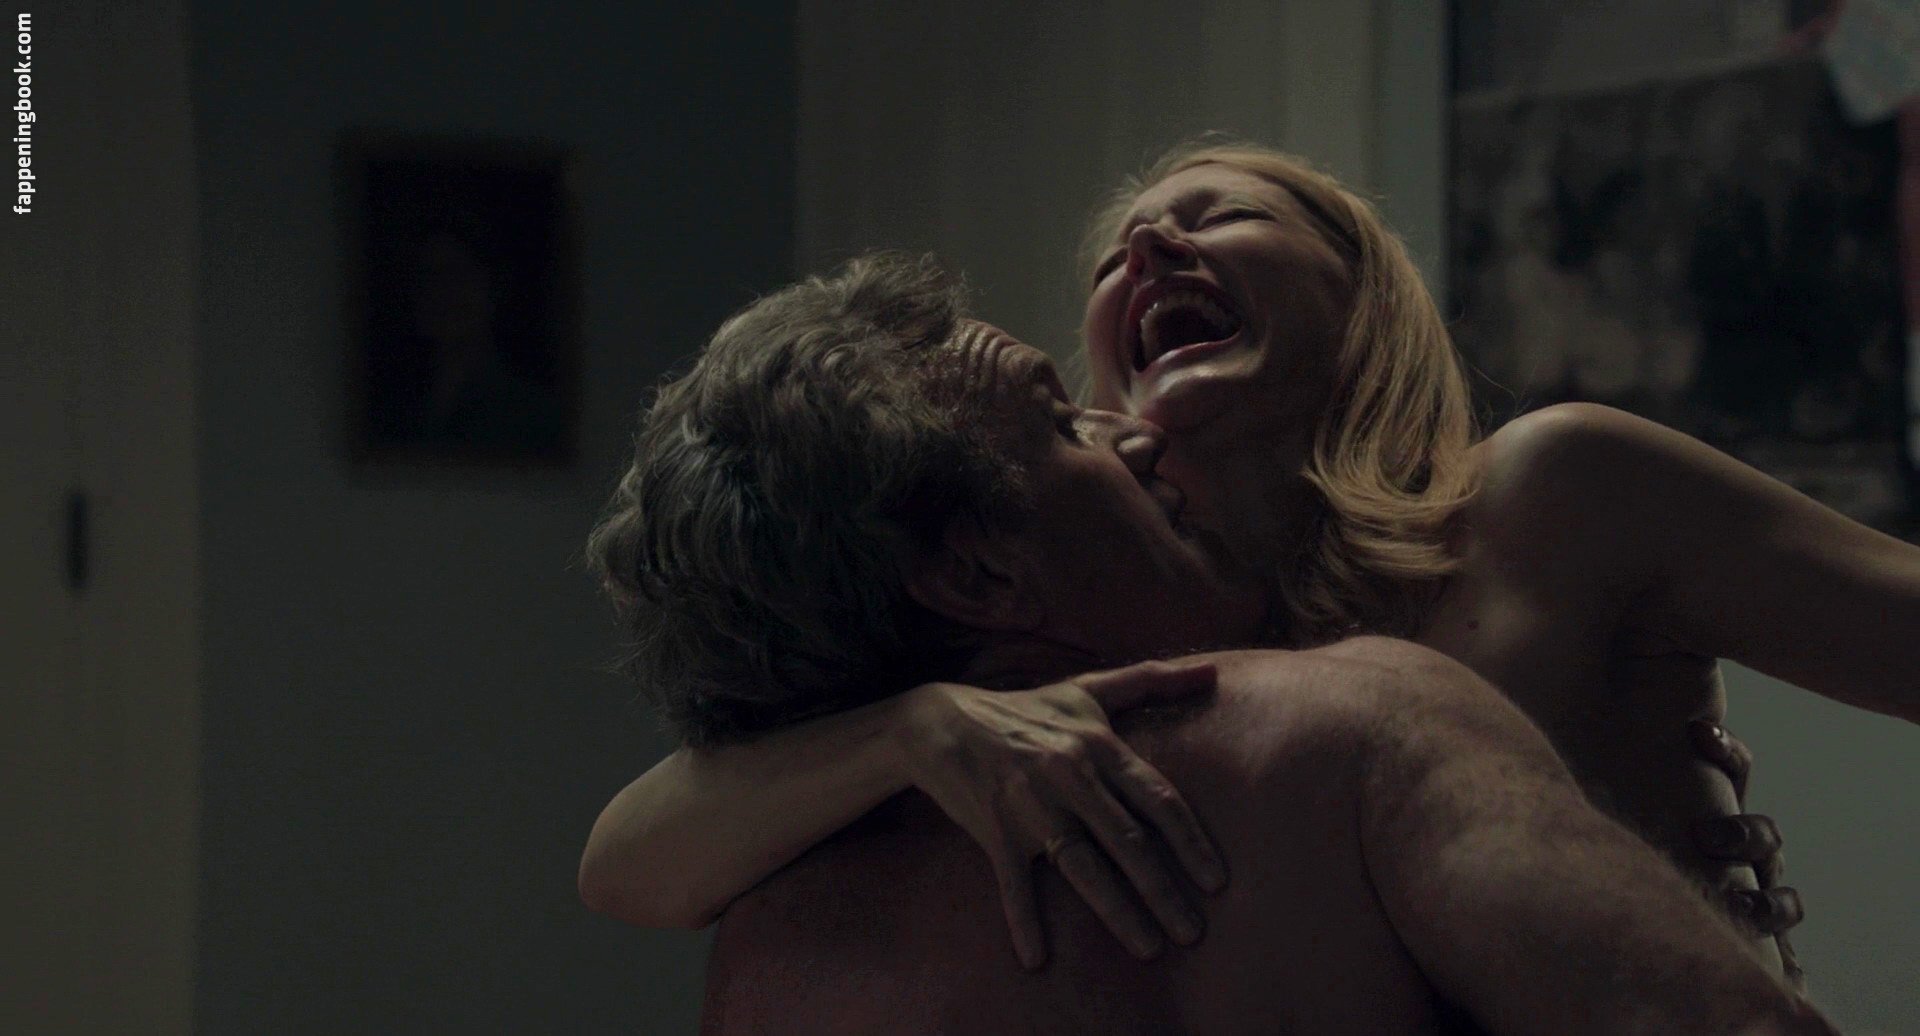 Patricia Clarkson Nude, The Fappening - Photo #436742 - FappeningBook.